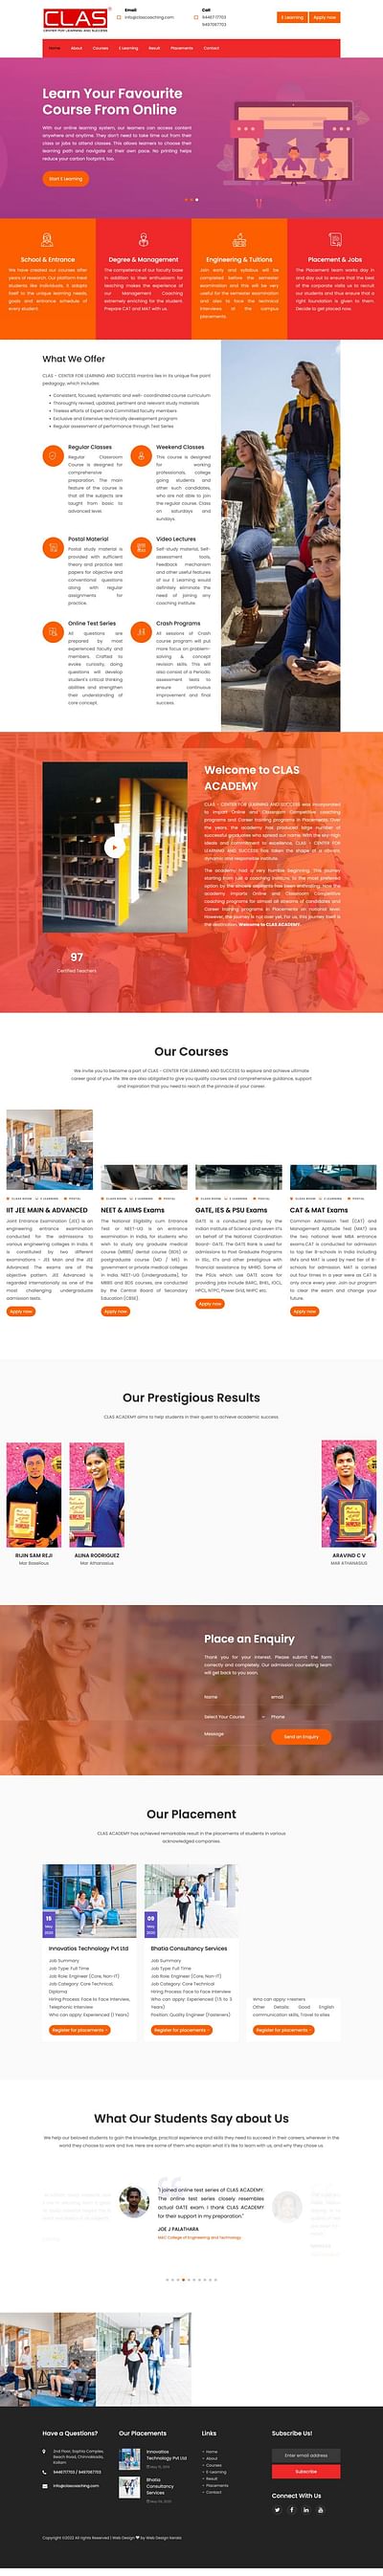 website for clascoaching - Website Creation